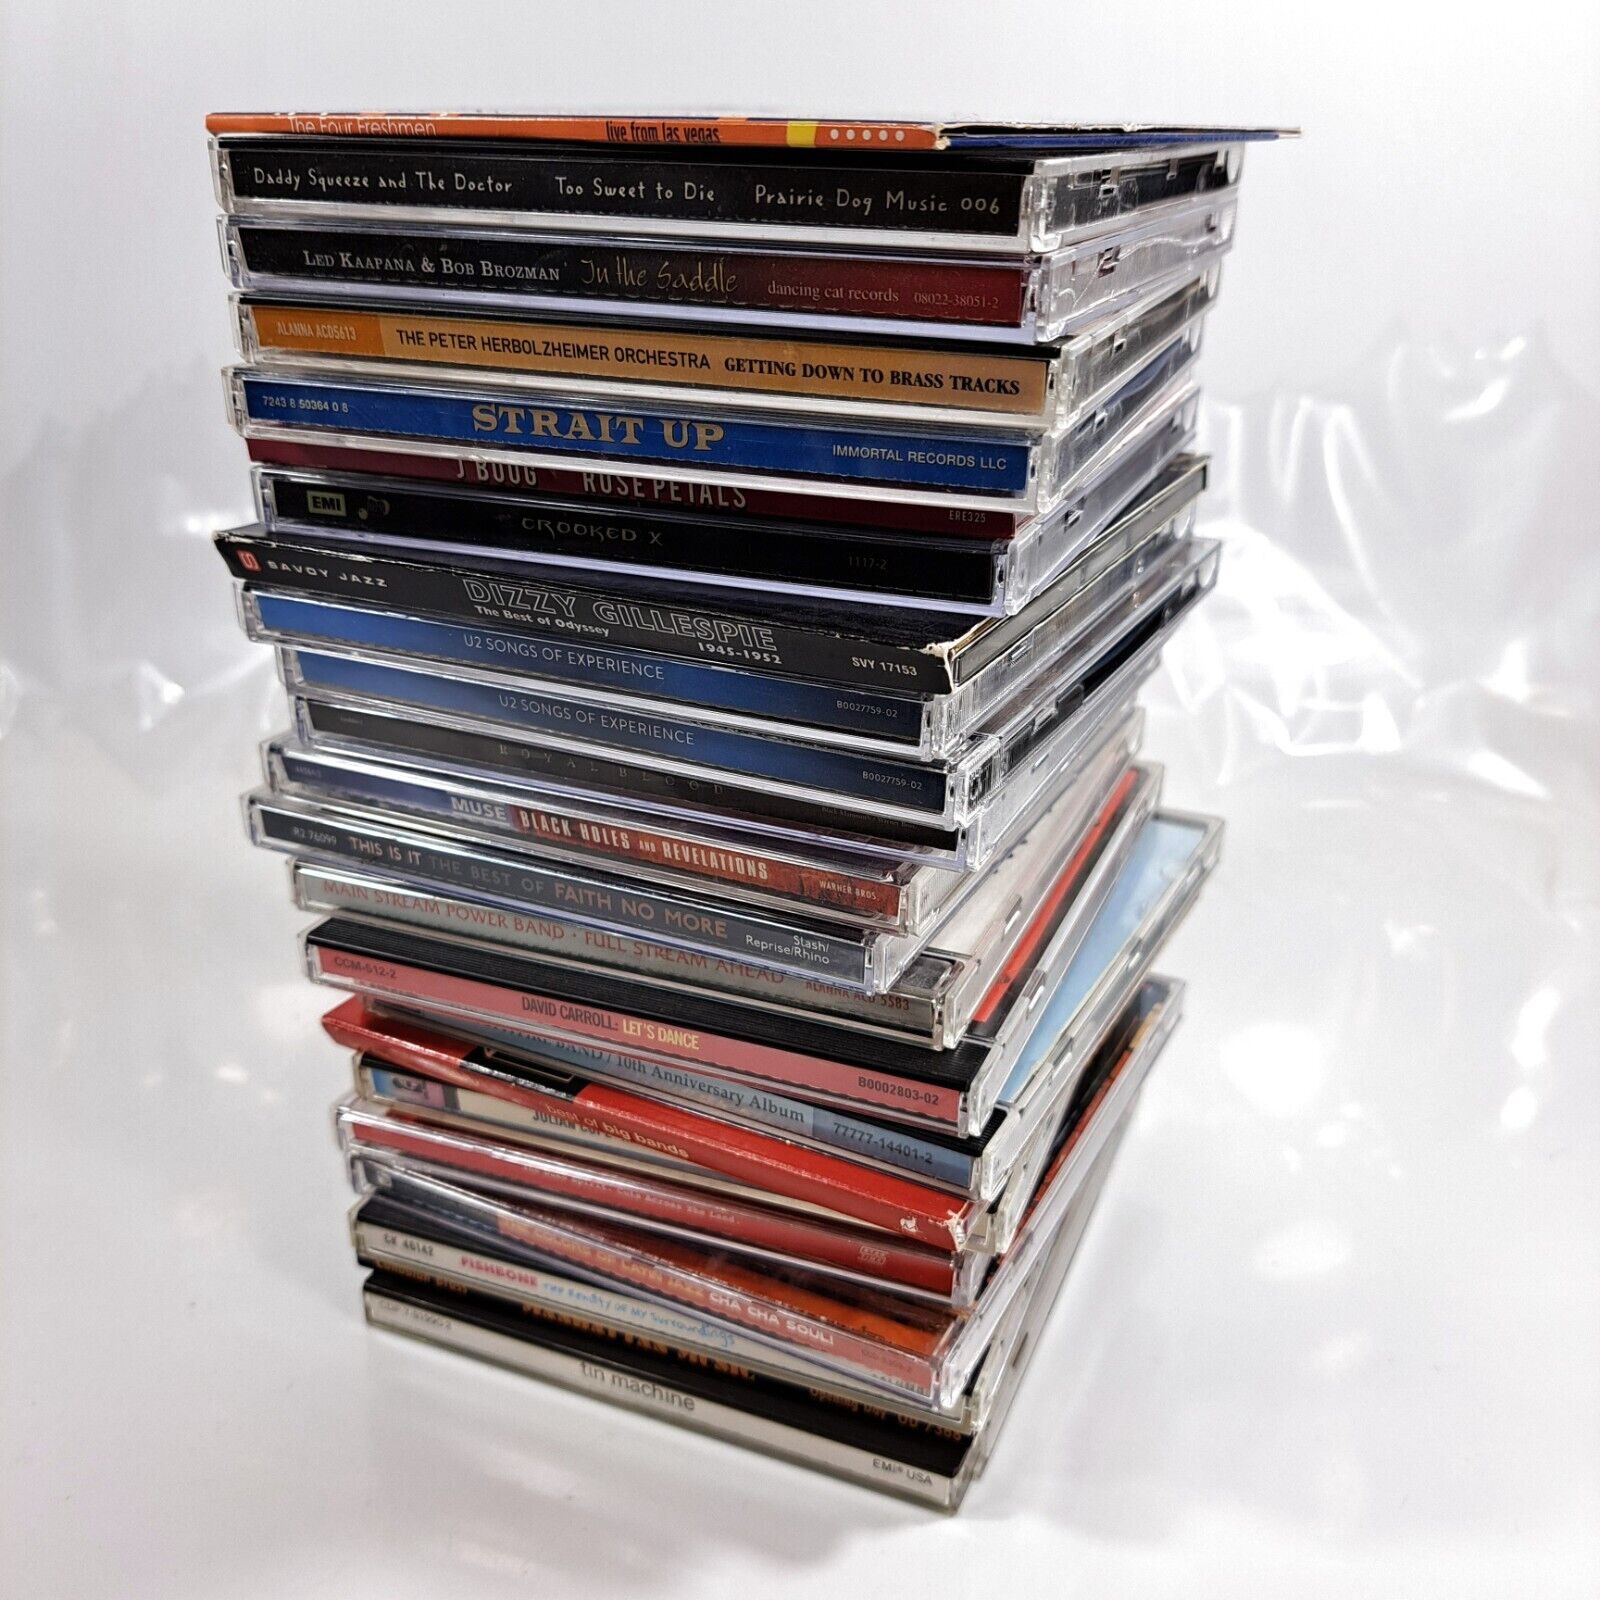 Big Music CD Lot of 24 Including Jazz Rock Various Artists/Styles Many Rare -L9